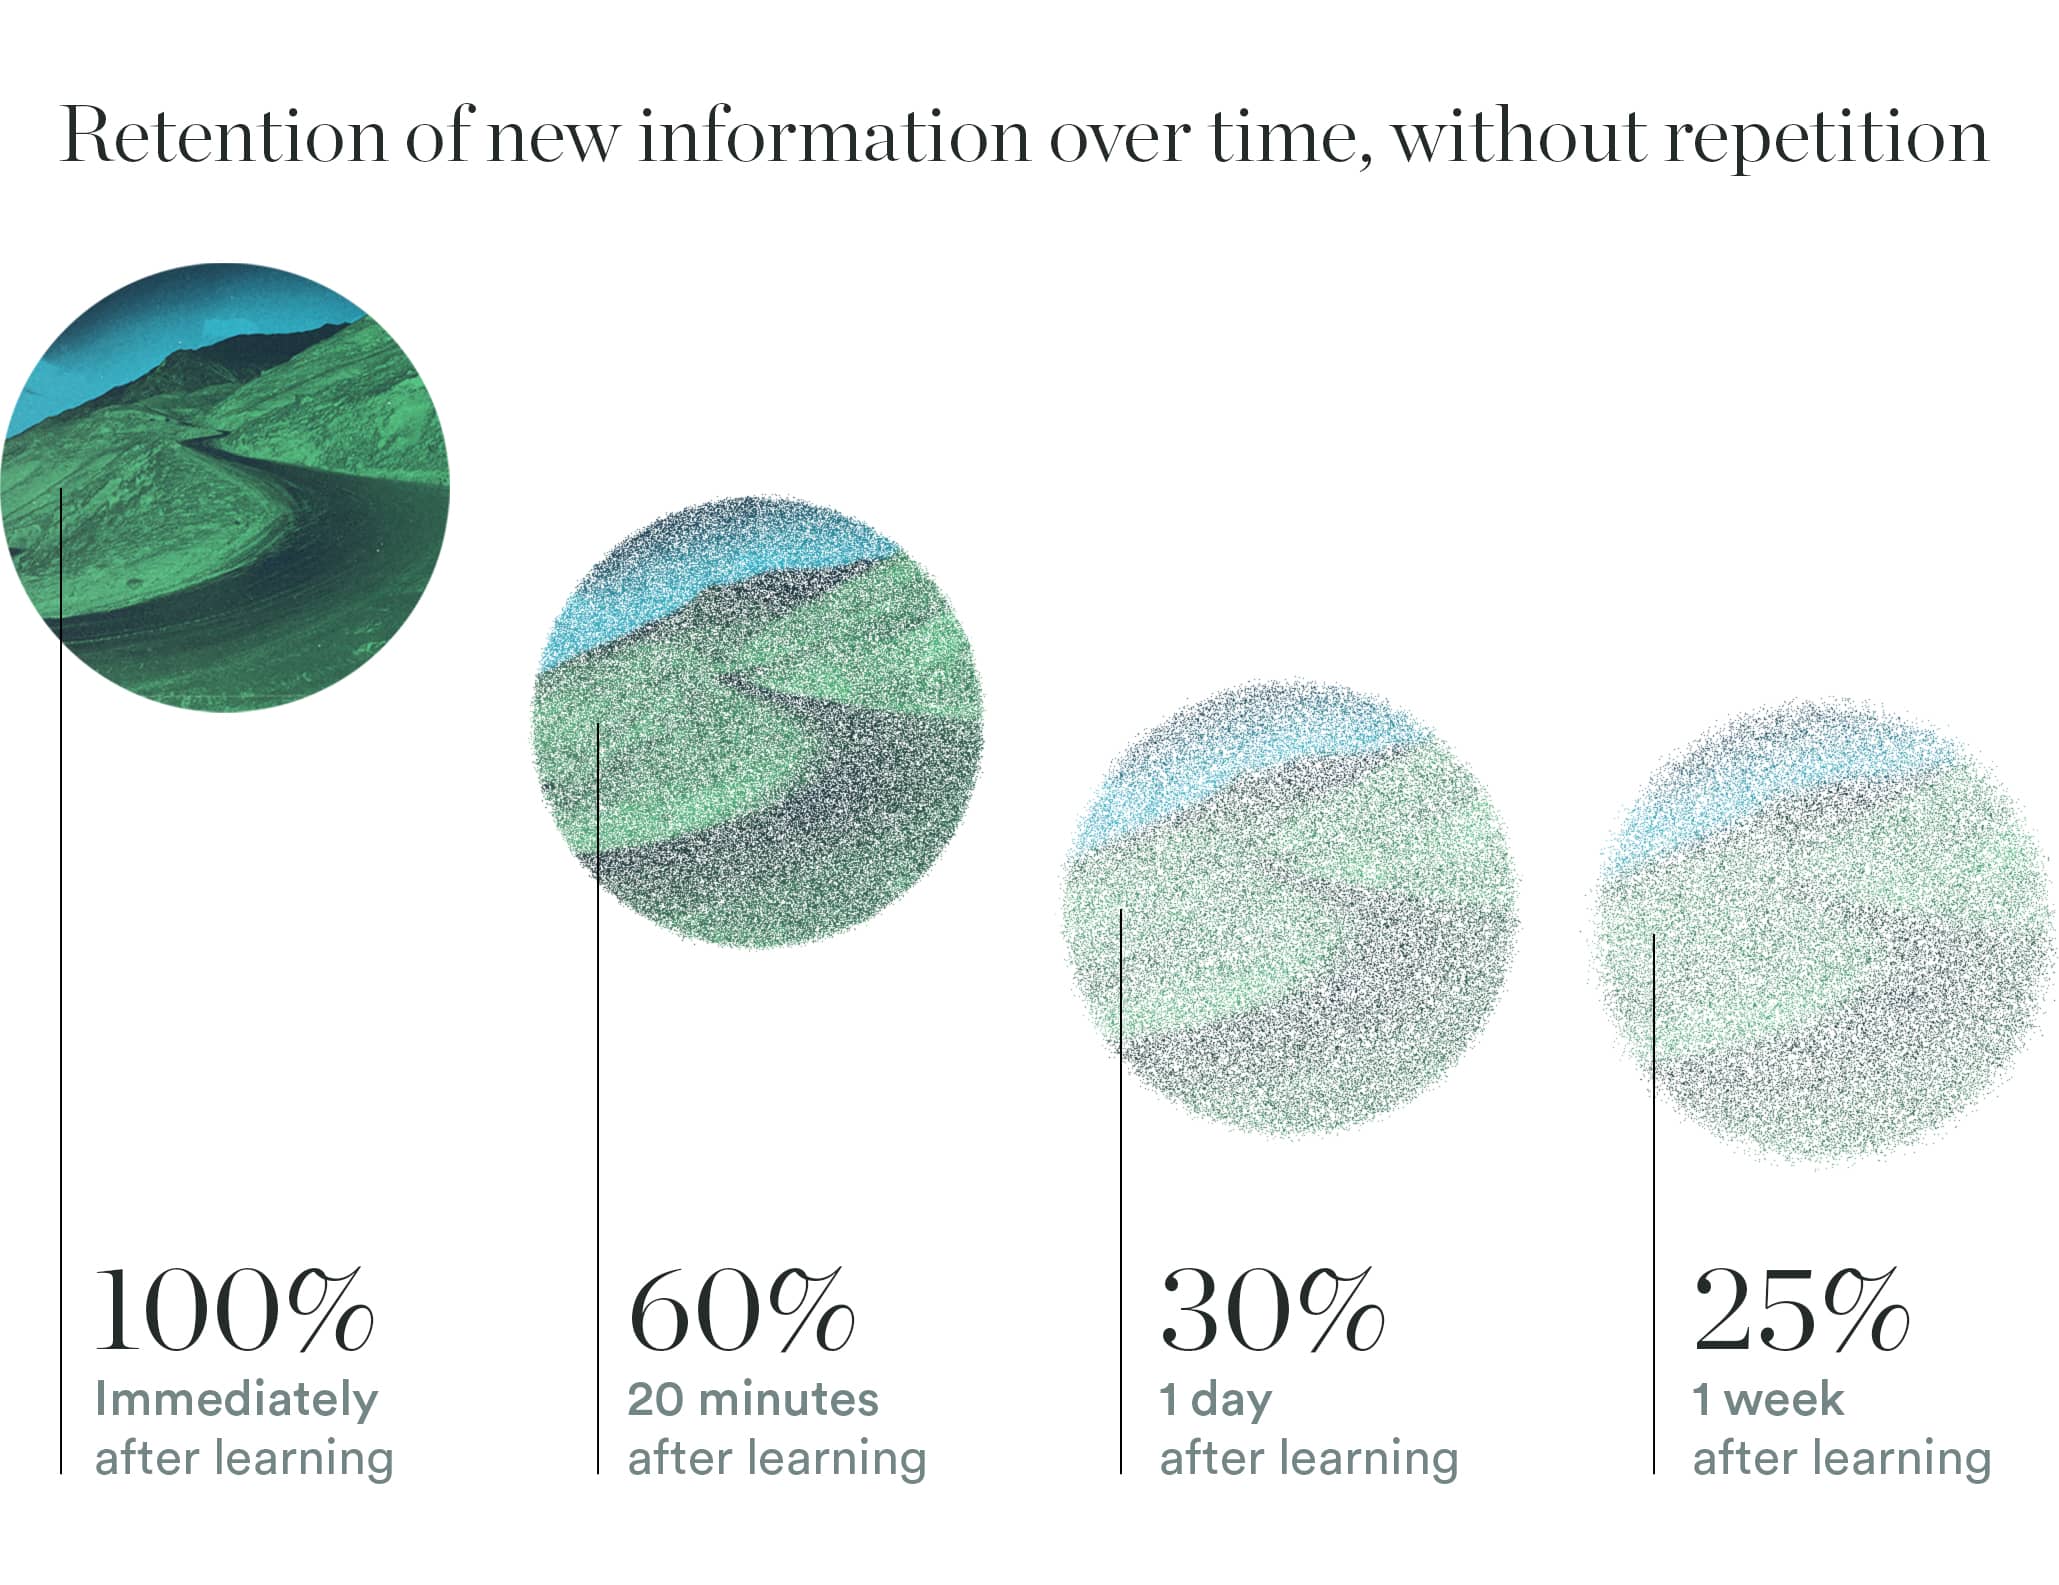 illustration of the forgetting curve [retention of new information over time, without repetition: 100% immediately after learning, 60% 20 minutes after learning, 30% 1 day after learning, 25% 1 week after learning]